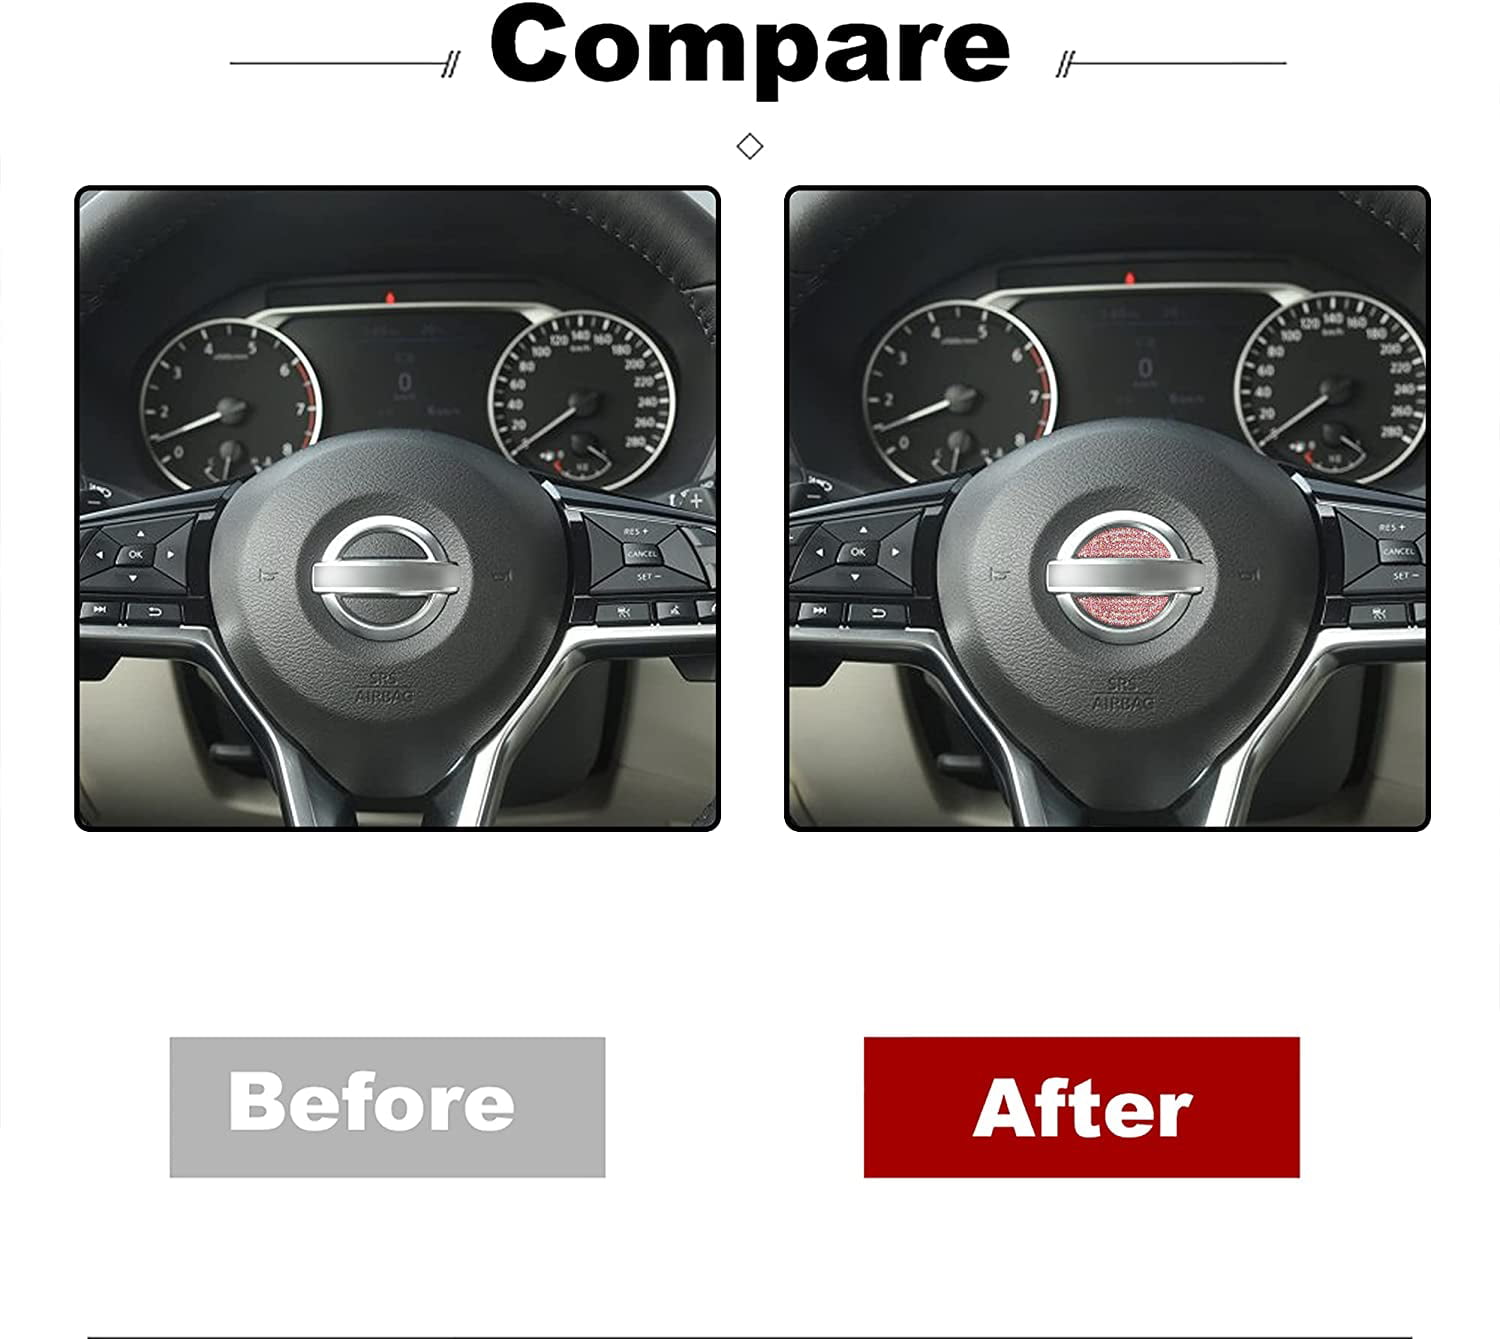 TopDall Bling Steering Wheel Unique Crystal Decal Decoration Cover Sticker Compatible for Nissan 